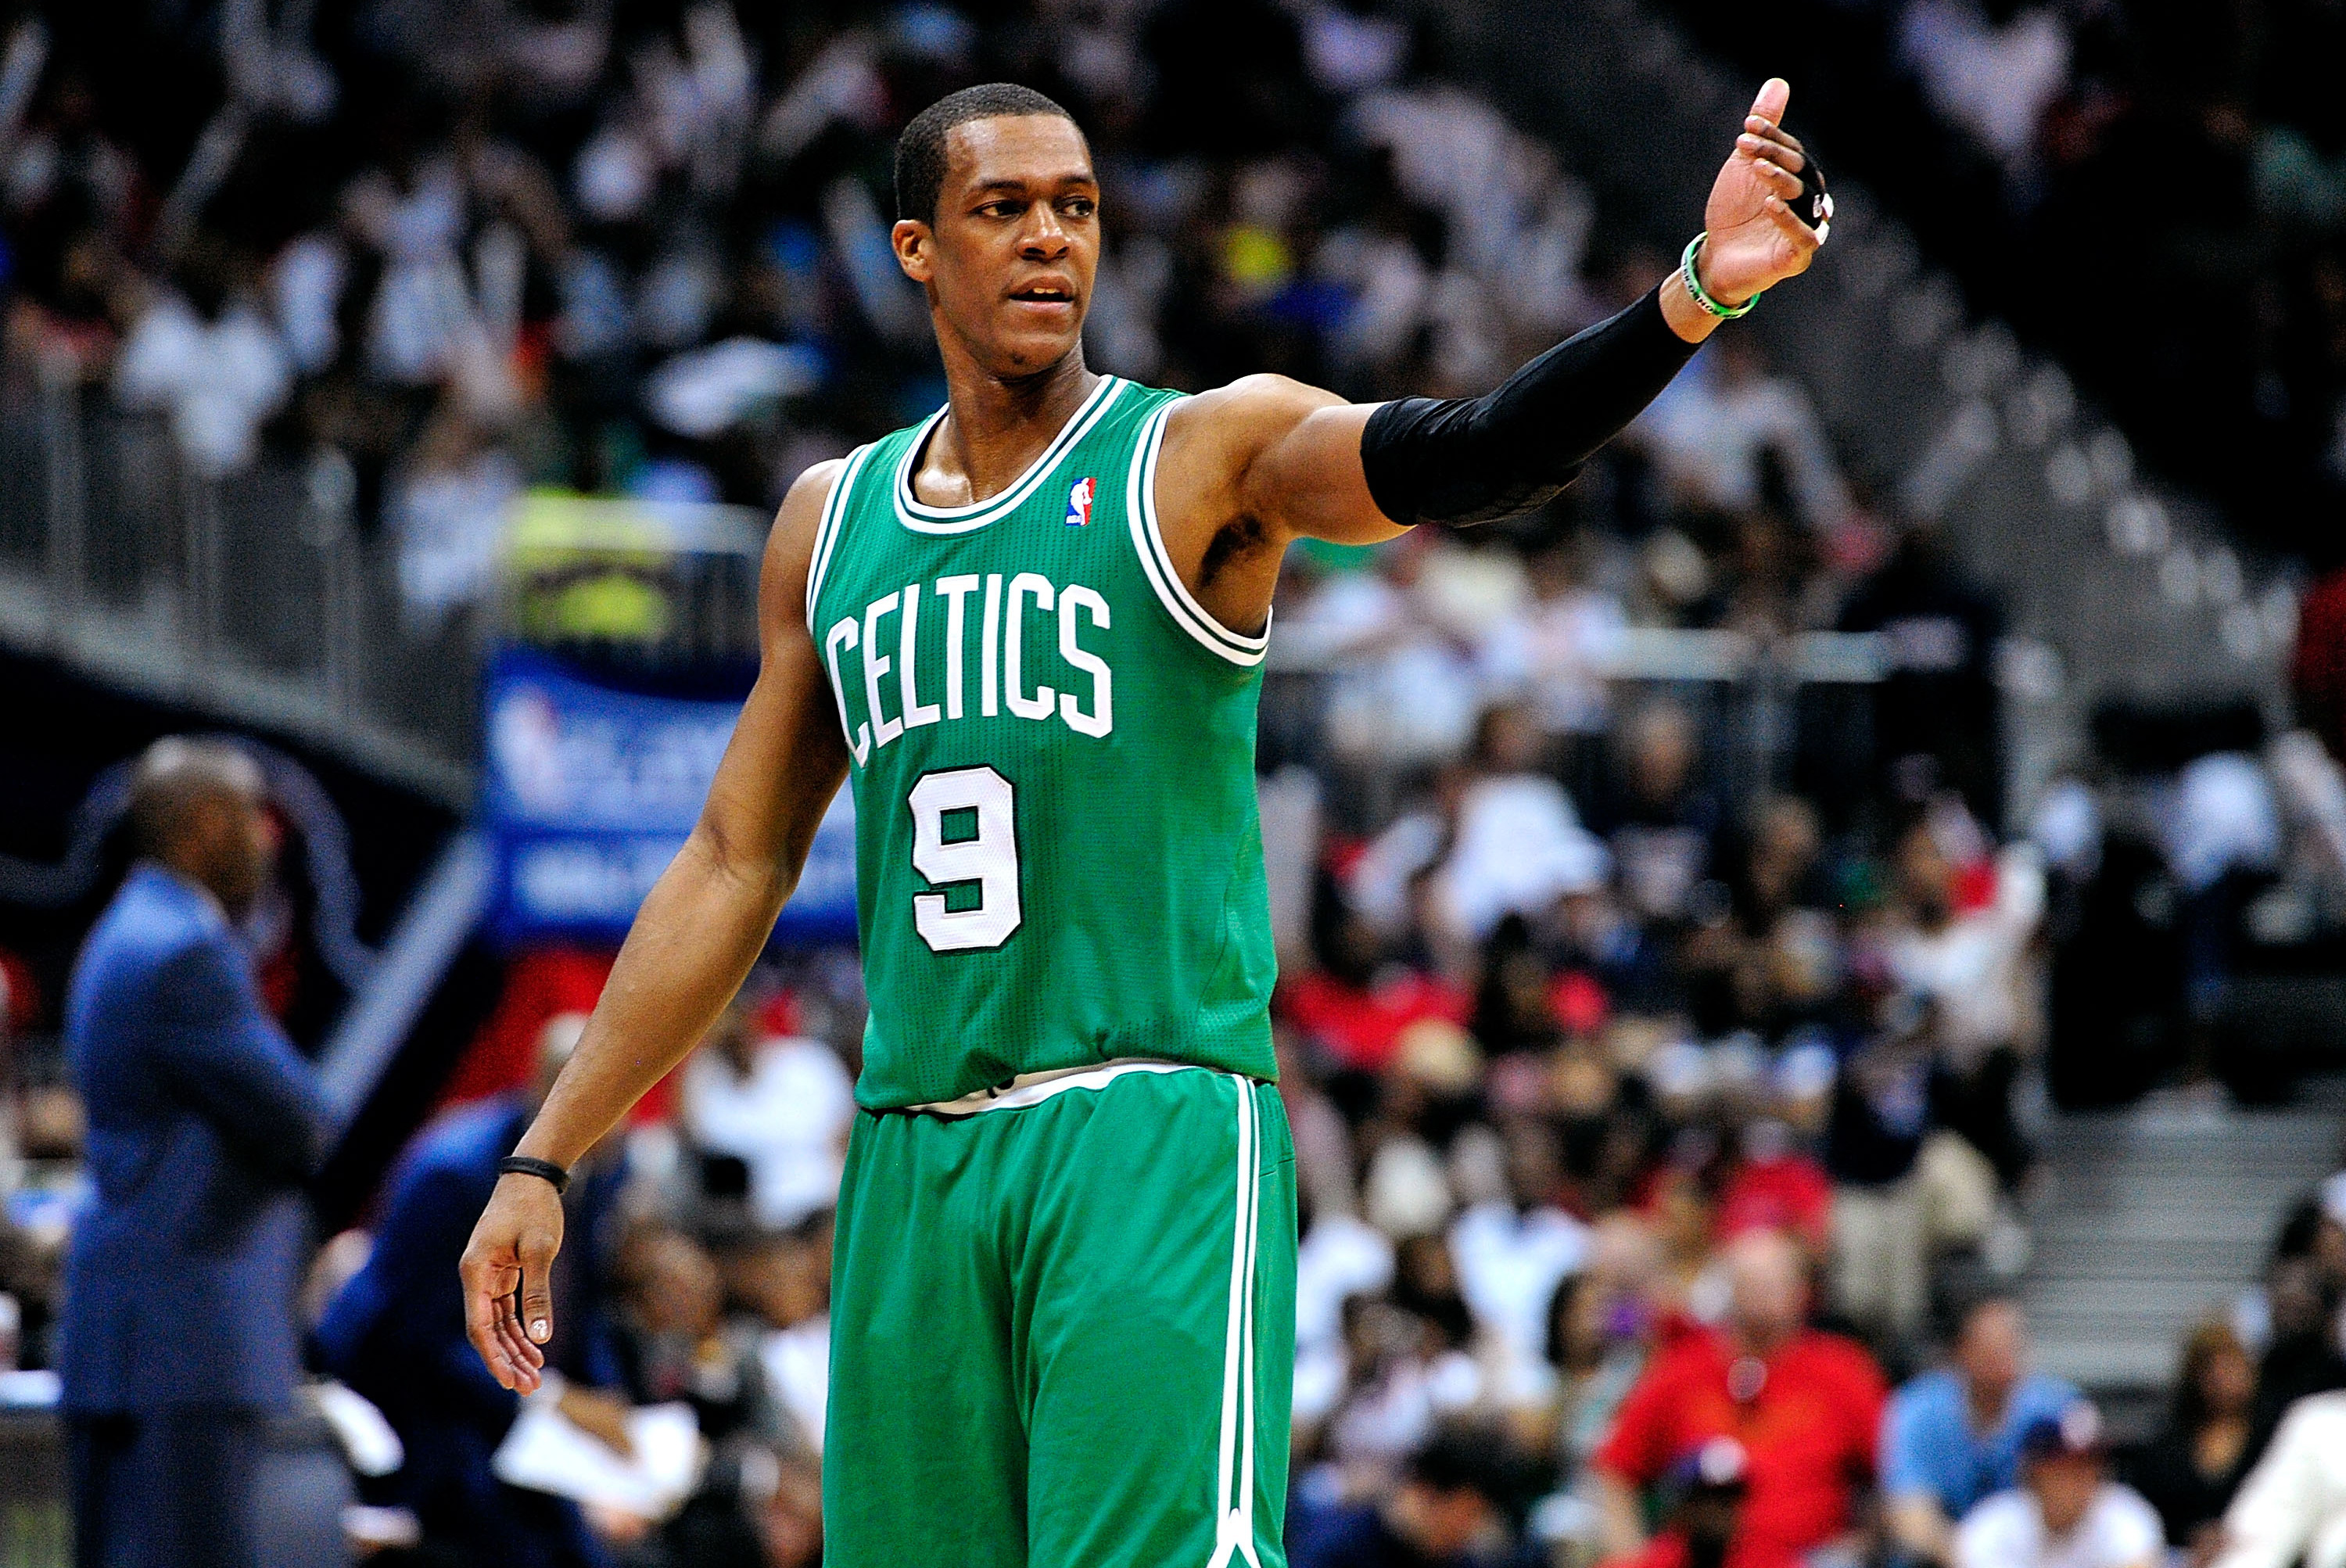 Ten years after heyday with Celtics, Rajon Rondo back in the